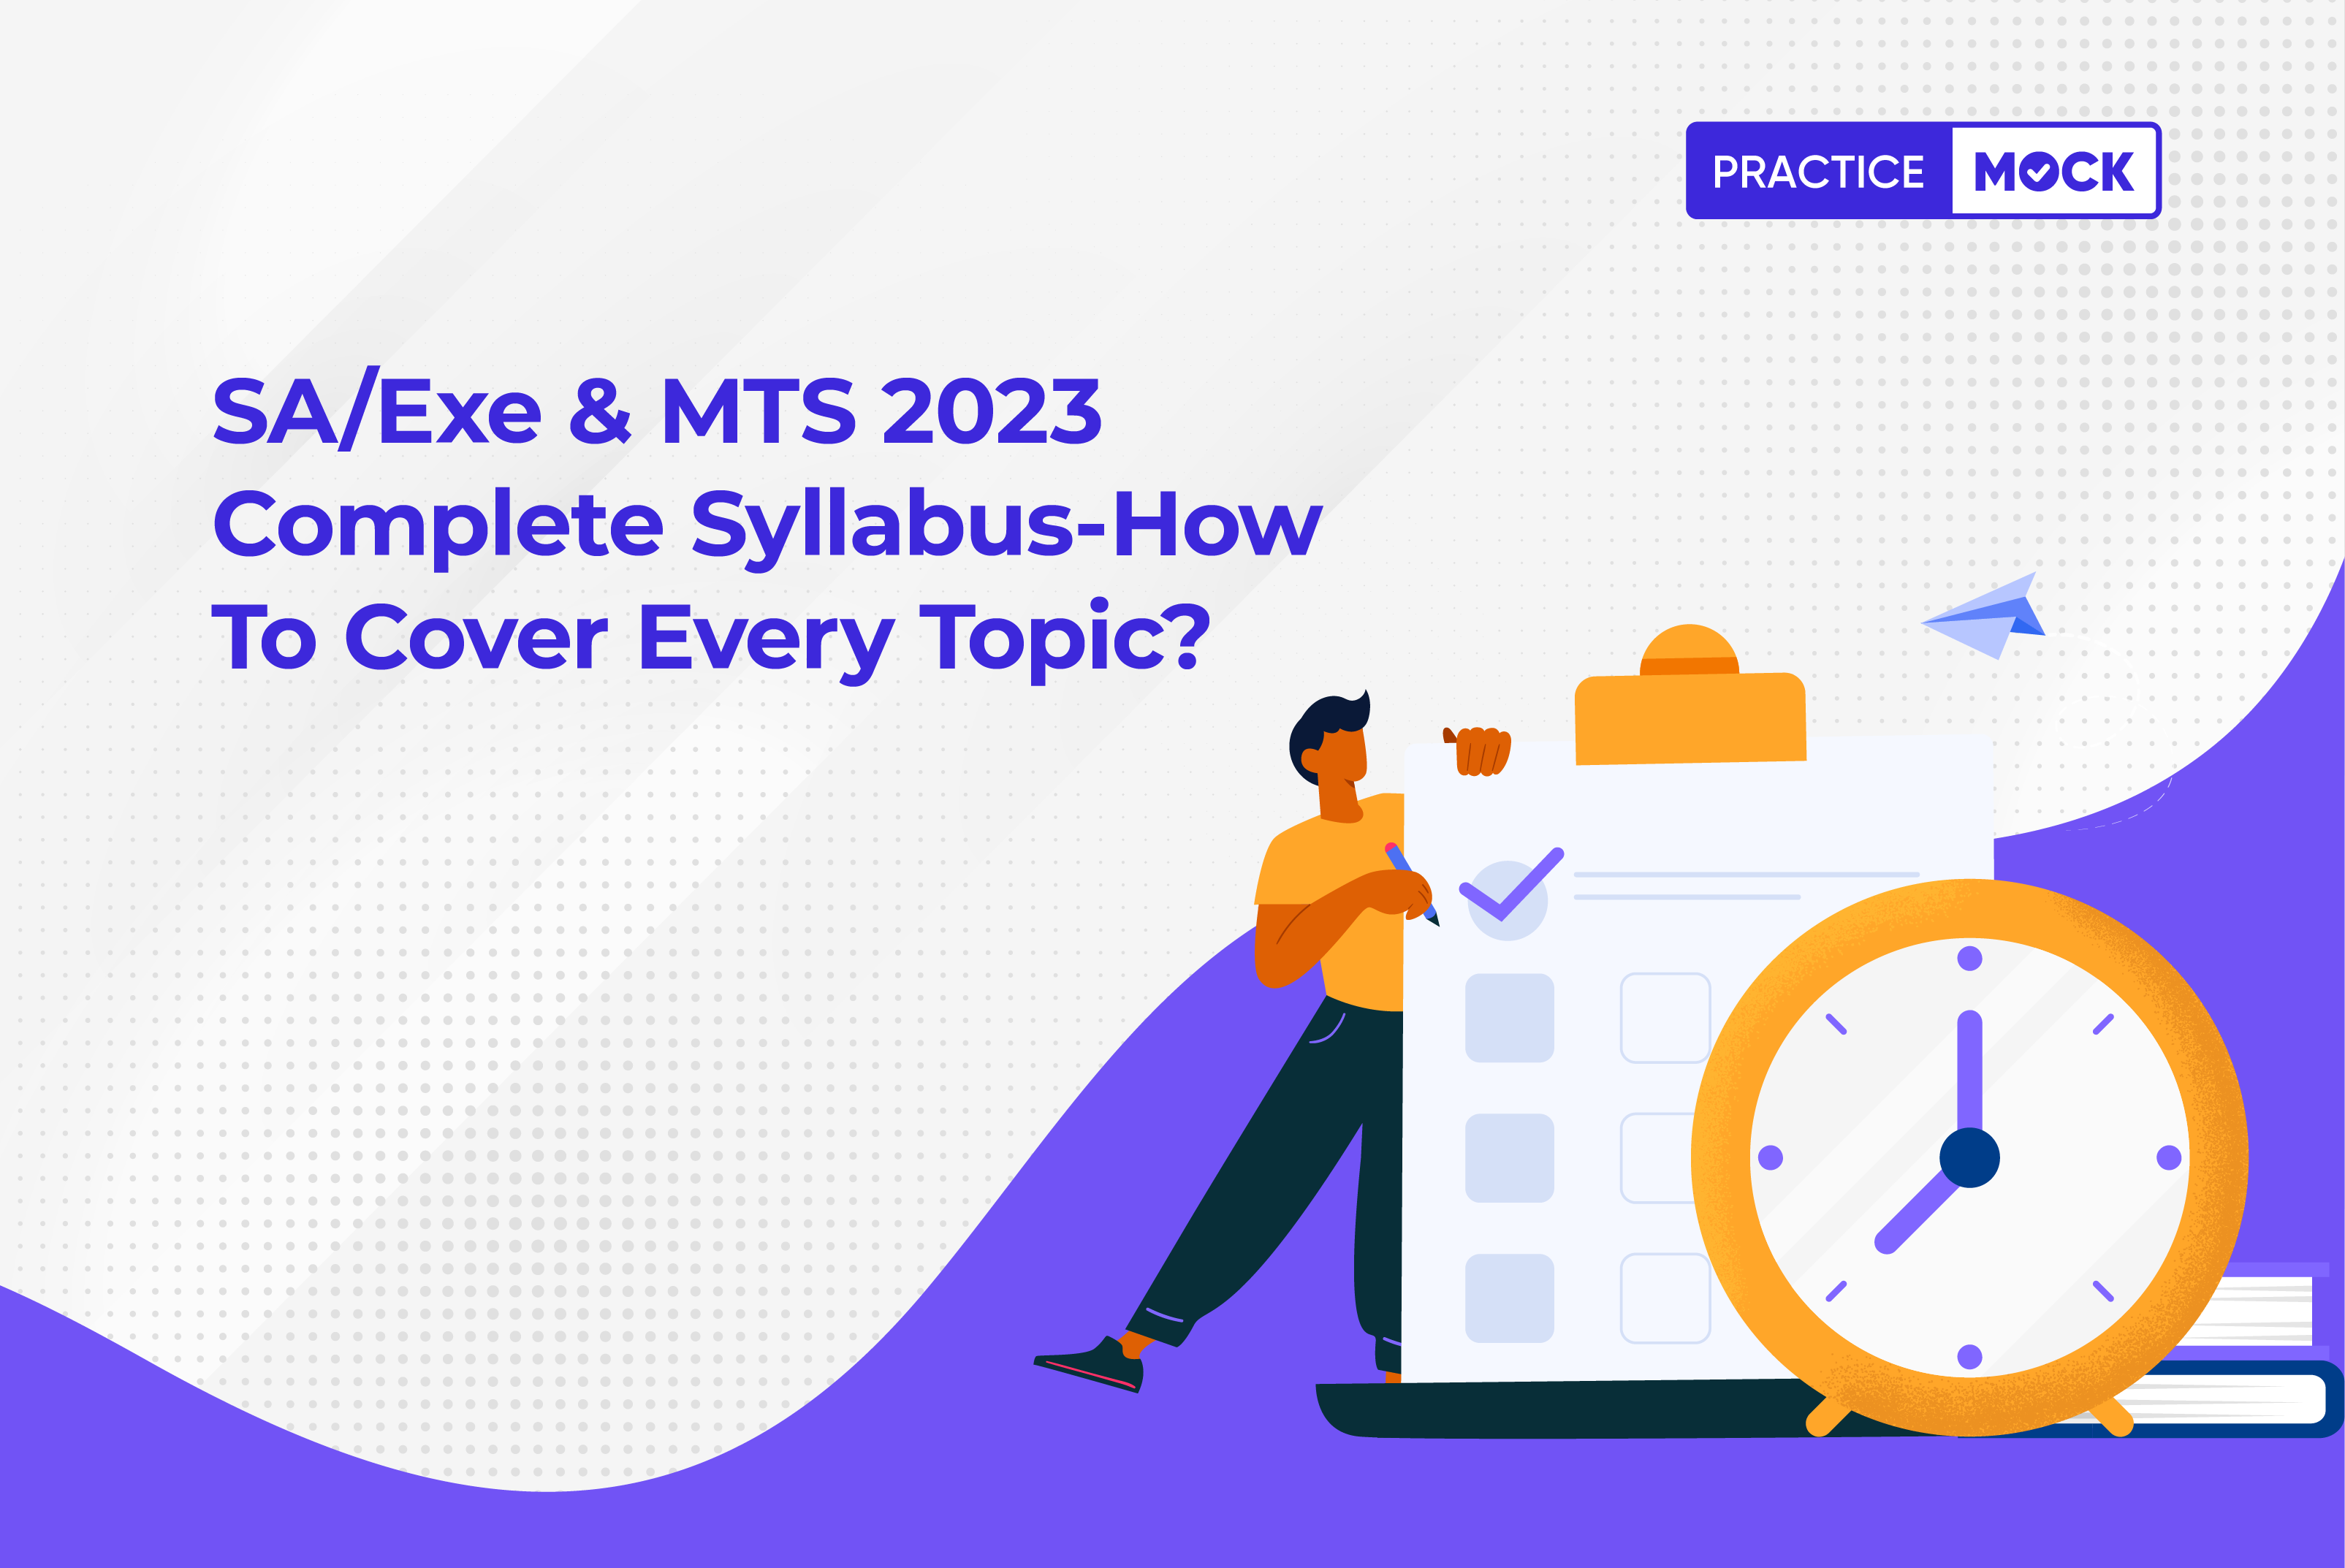 IB Security Assistant/Executive (SA/Exe) & MTS 2023 Complete Syllabus-How to Cover Every Topic?